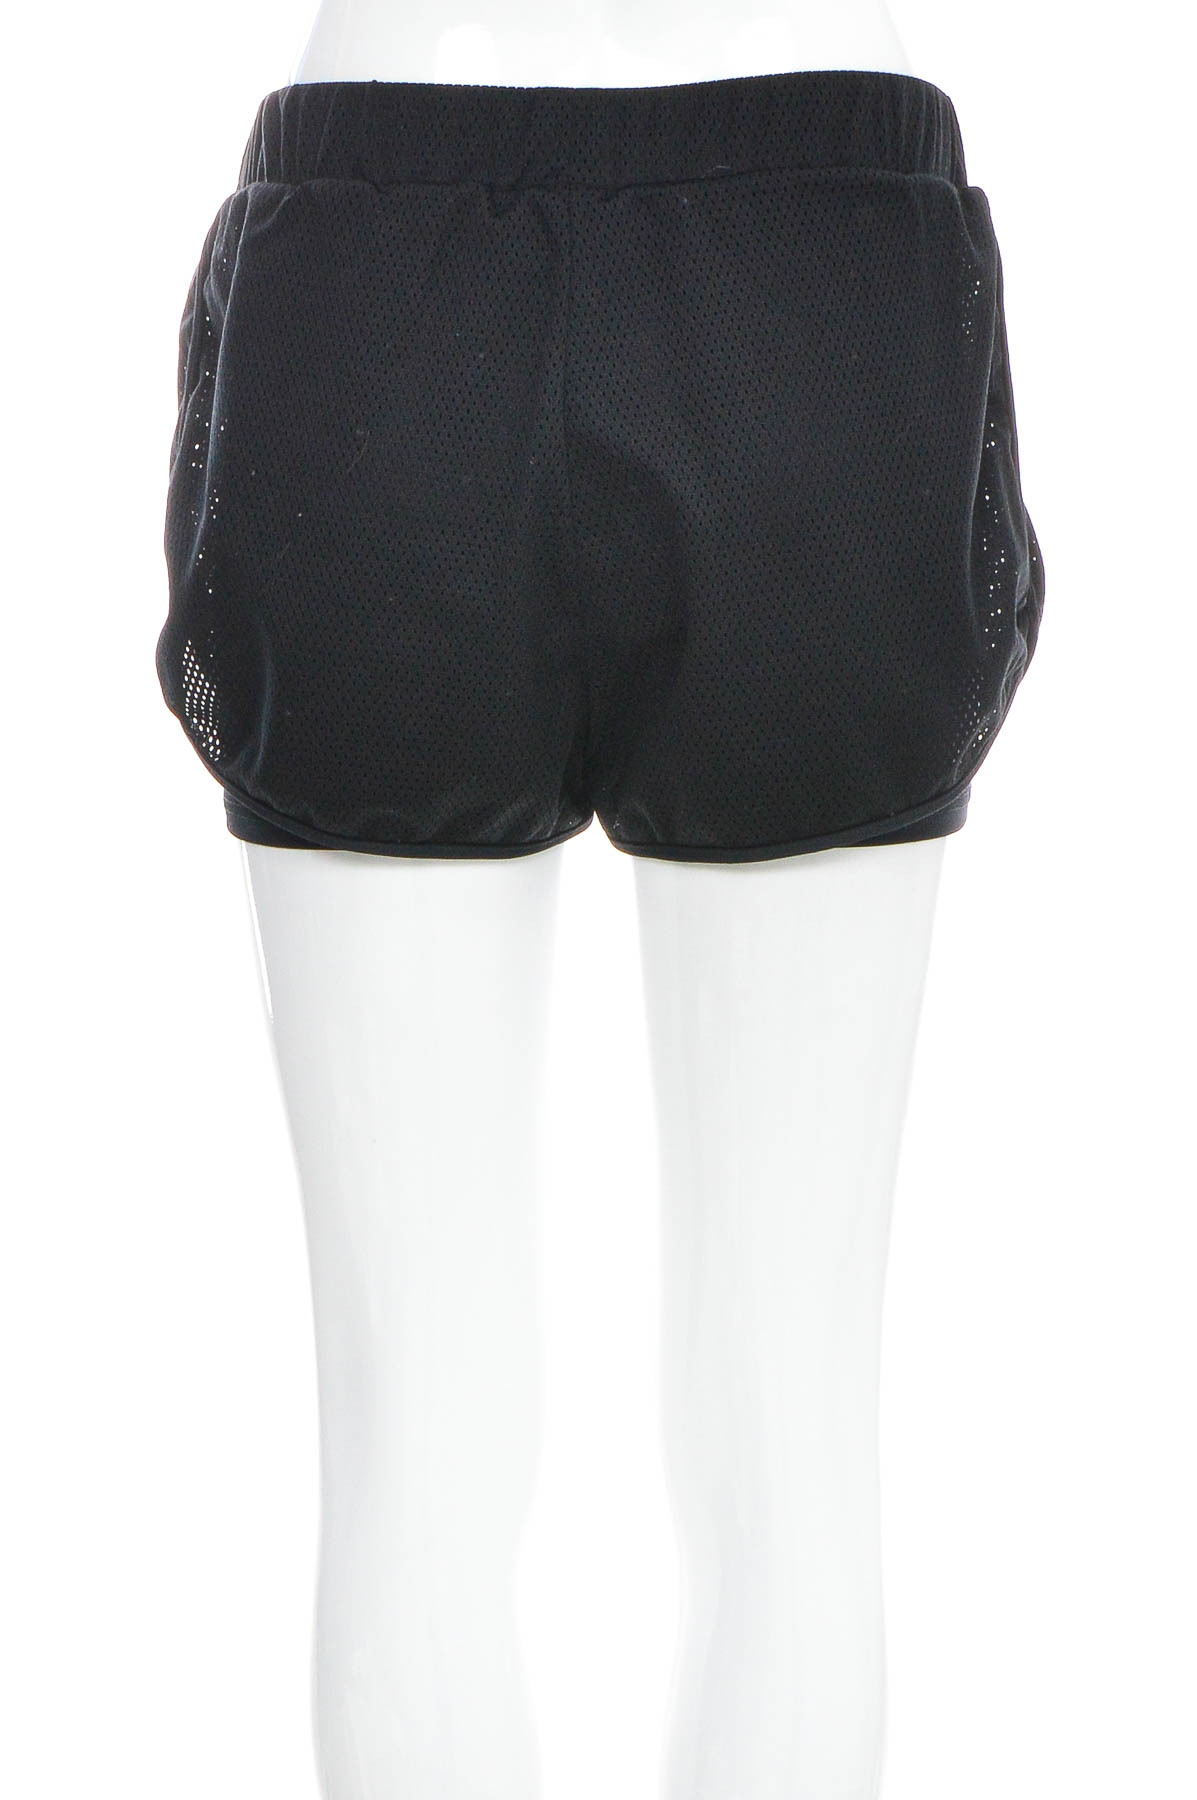 Women's shorts - Russell Athletic - 1